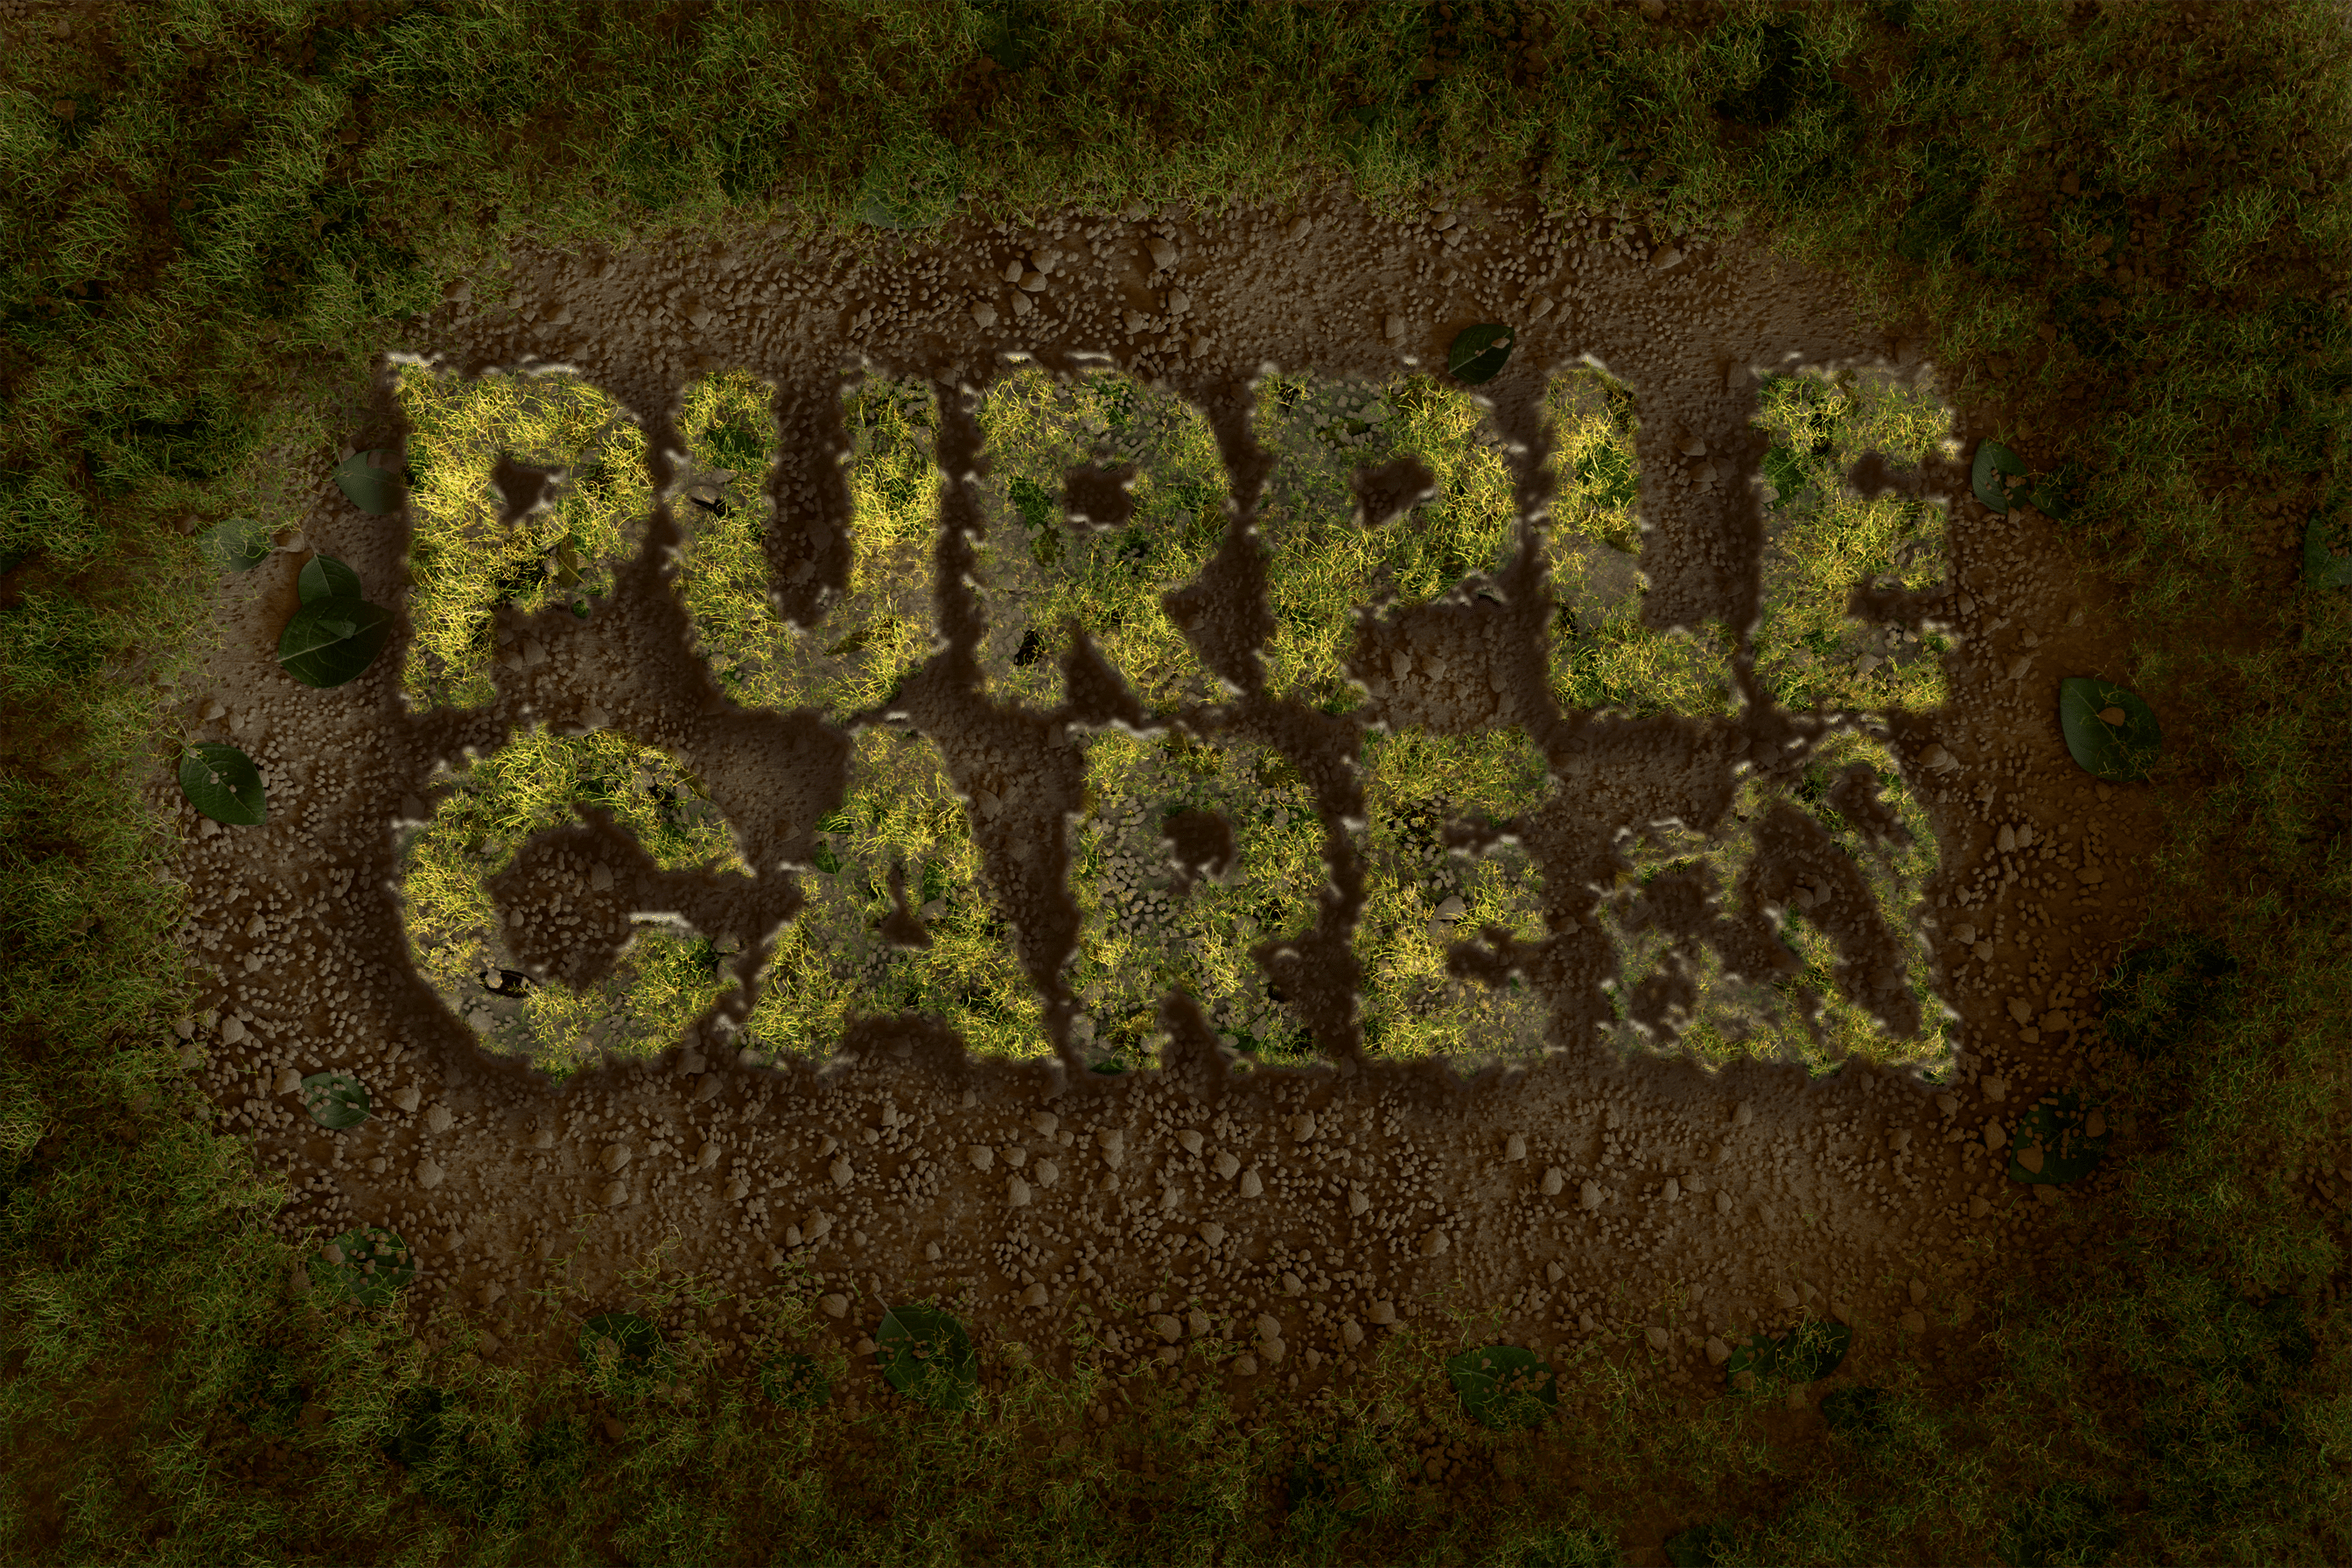 Fostering Ecological Equilibrium: Purple Care's Scientific Approach to Organic Lawn Care and Regenerative Growth